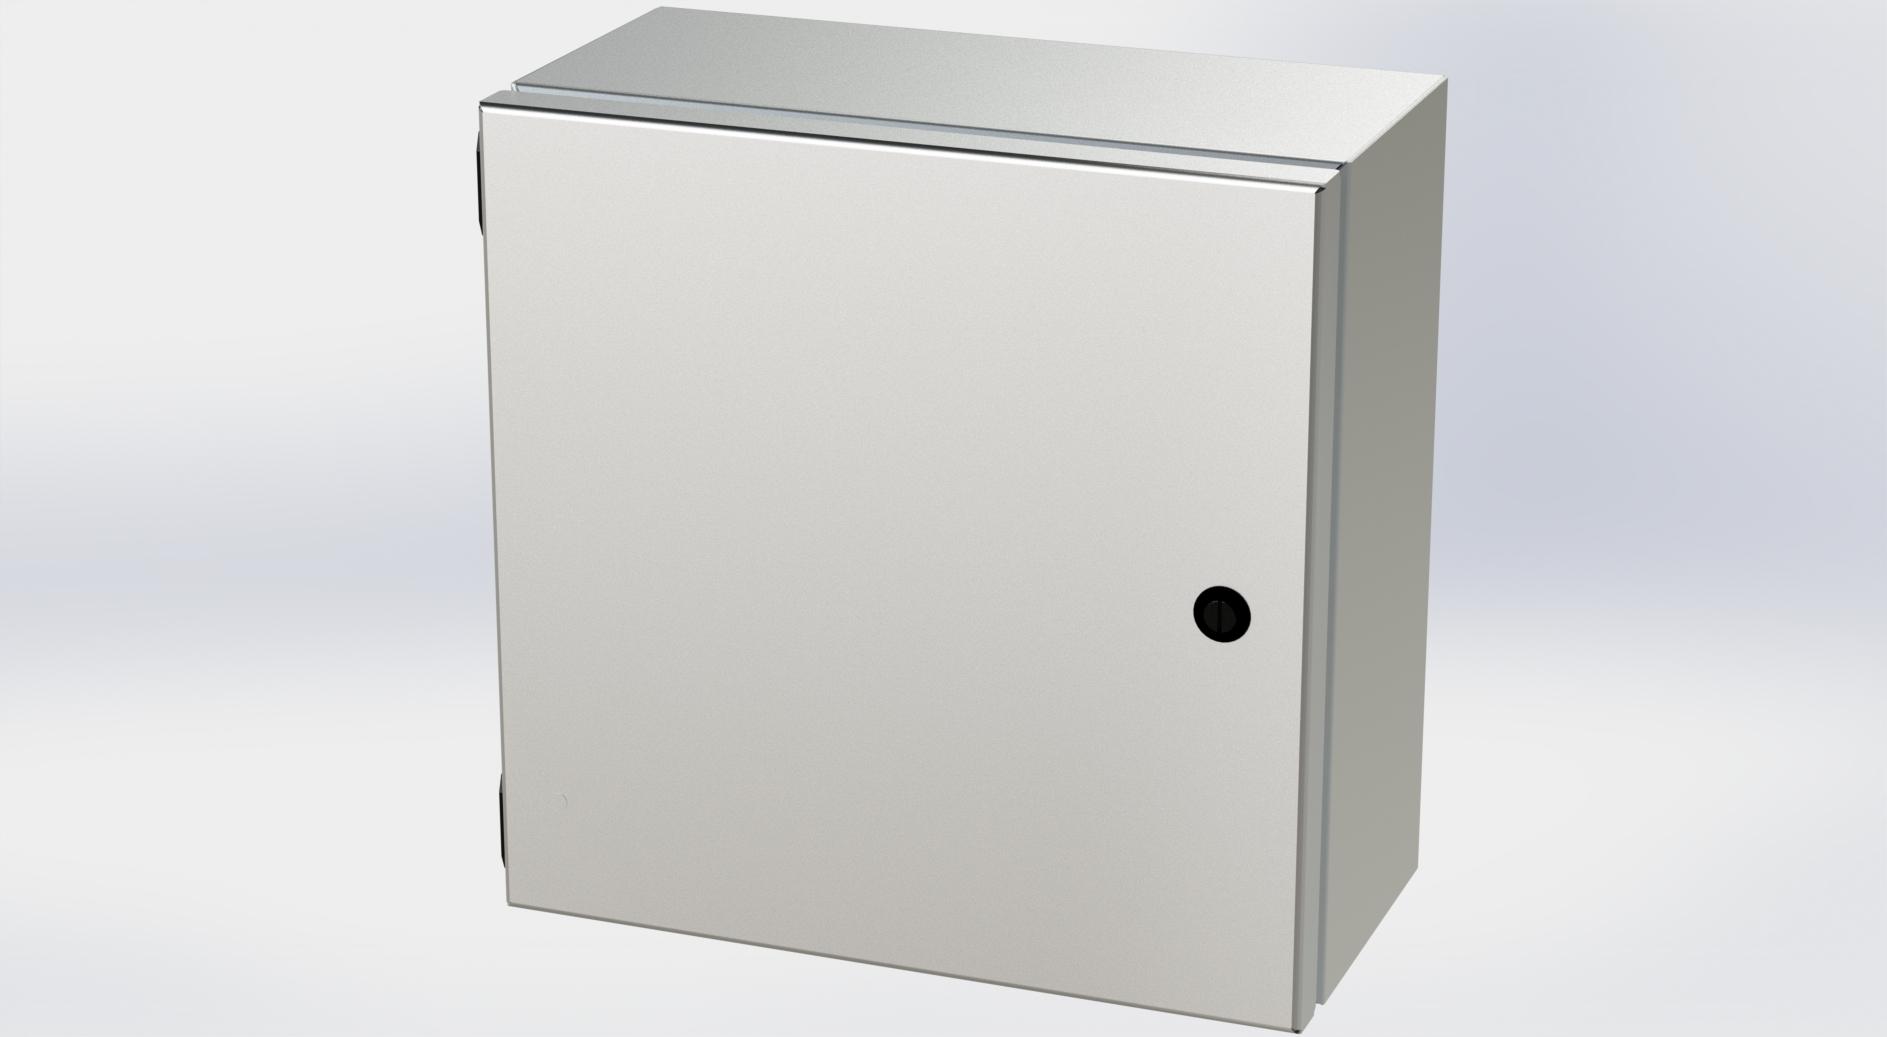 Saginaw Control SCE-1212ELJSS S.S. ELJ Enclosure, Height:12.00", Width:12.00", Depth:6.00", #4 brushed finish on all exterior surfaces. Optional sub-panels are powder coated white.